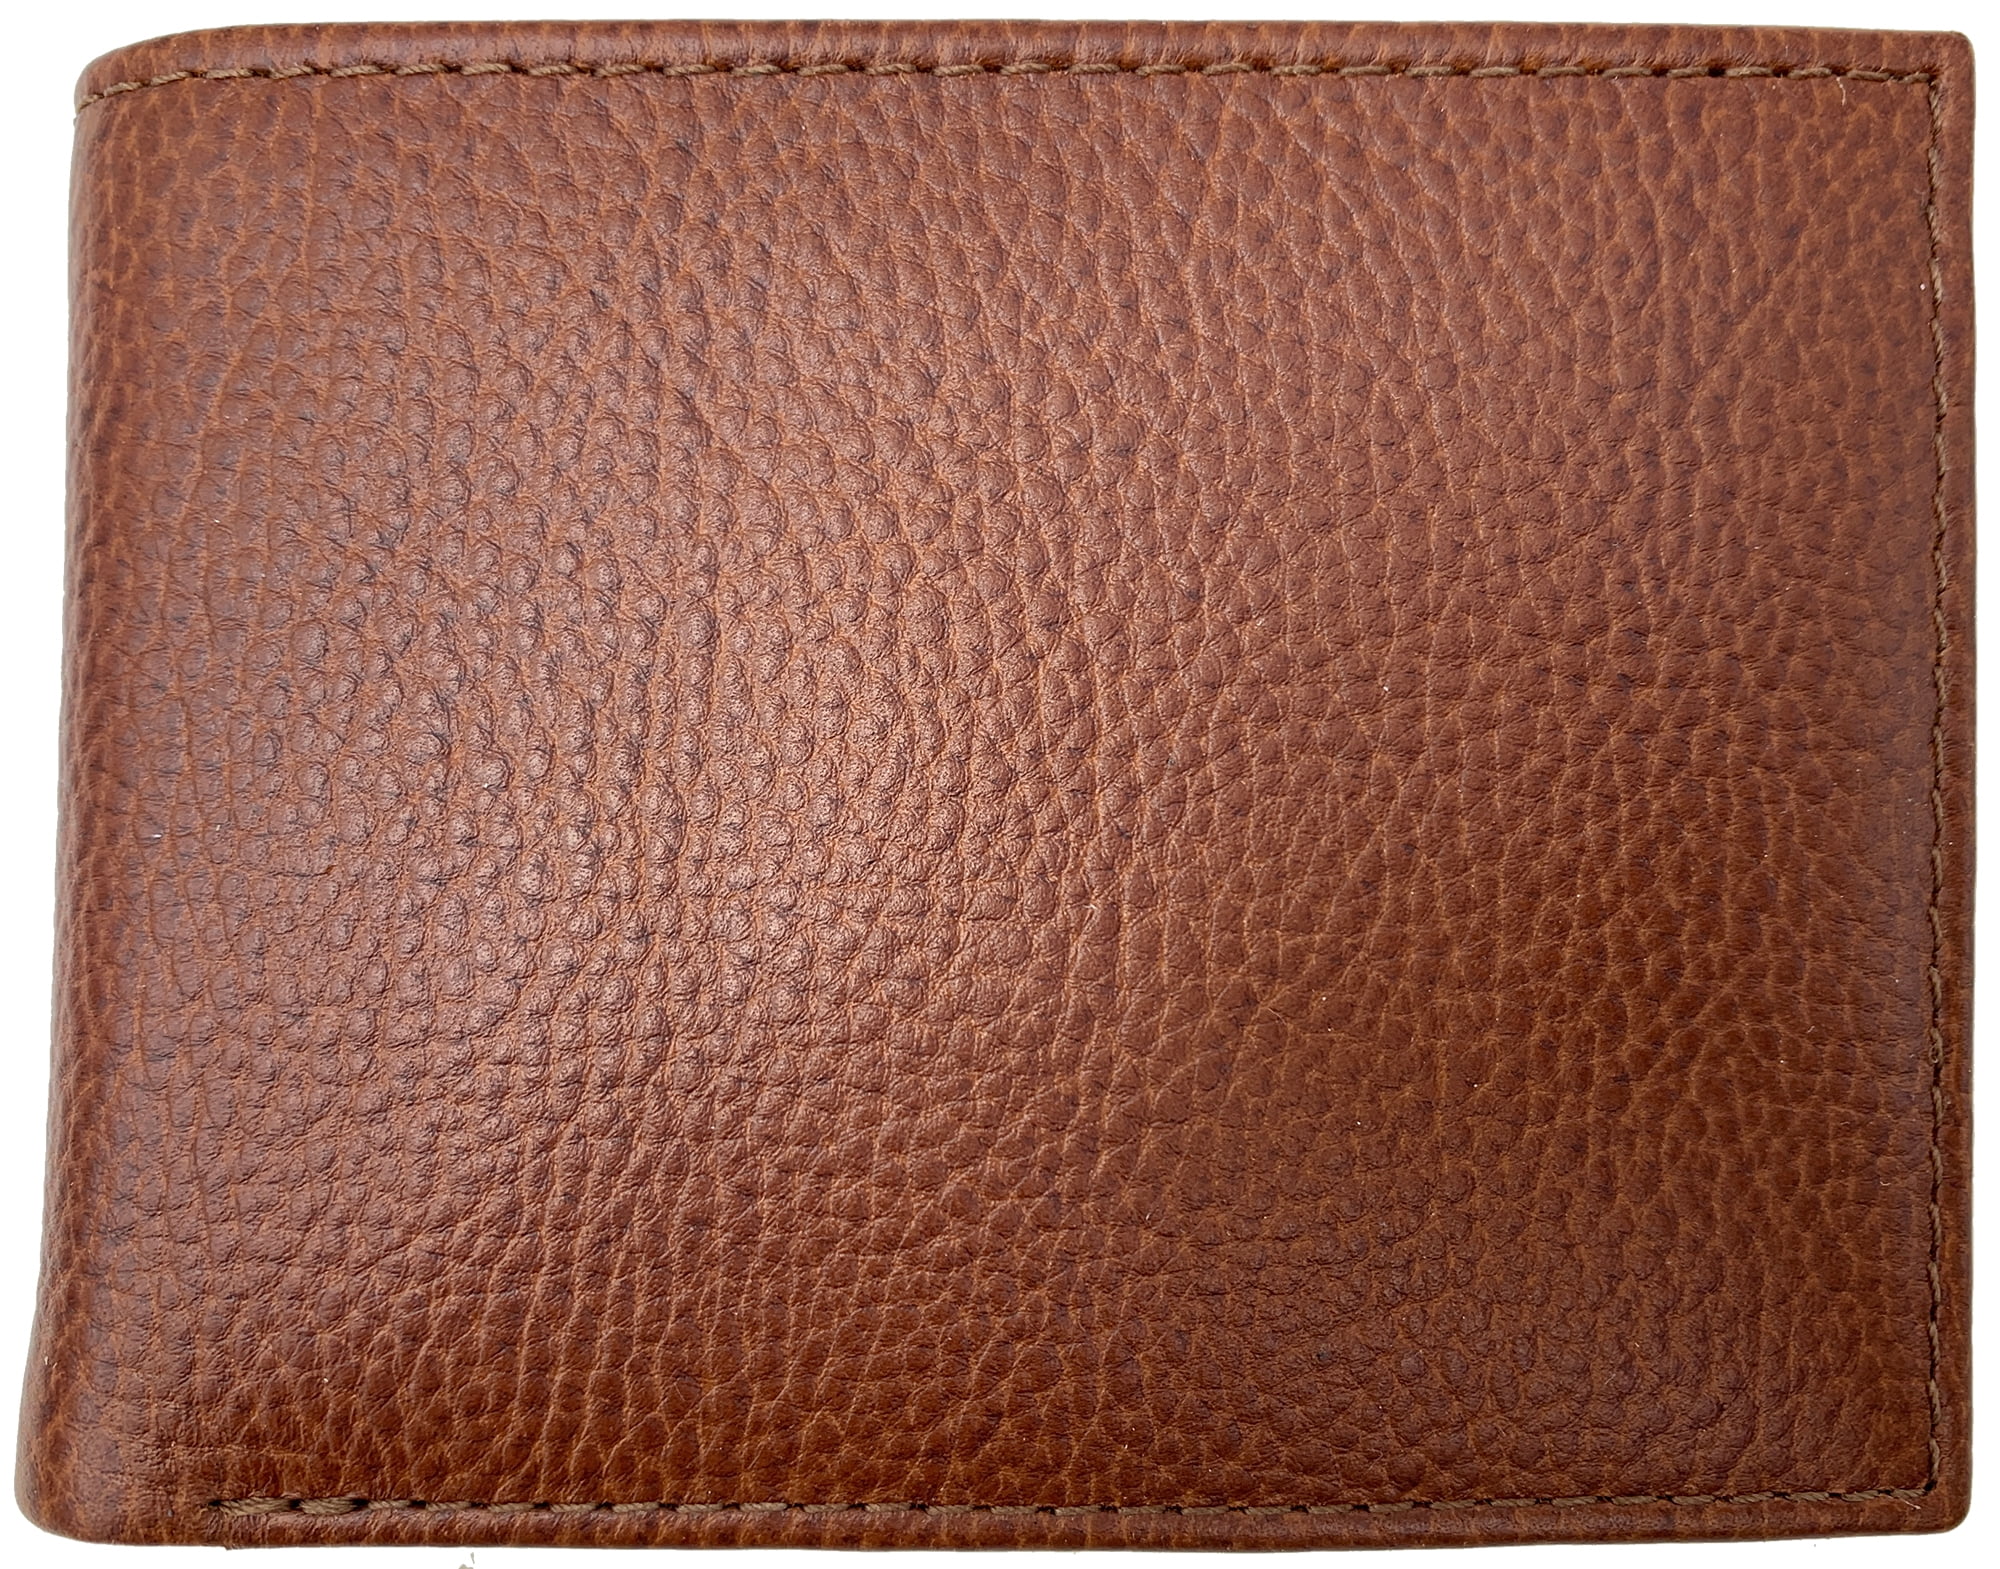 George Men's Milled Genuine Leather Bifold Wallet with Wing Sepia, RFID Protected, Men Ages 16 to 99